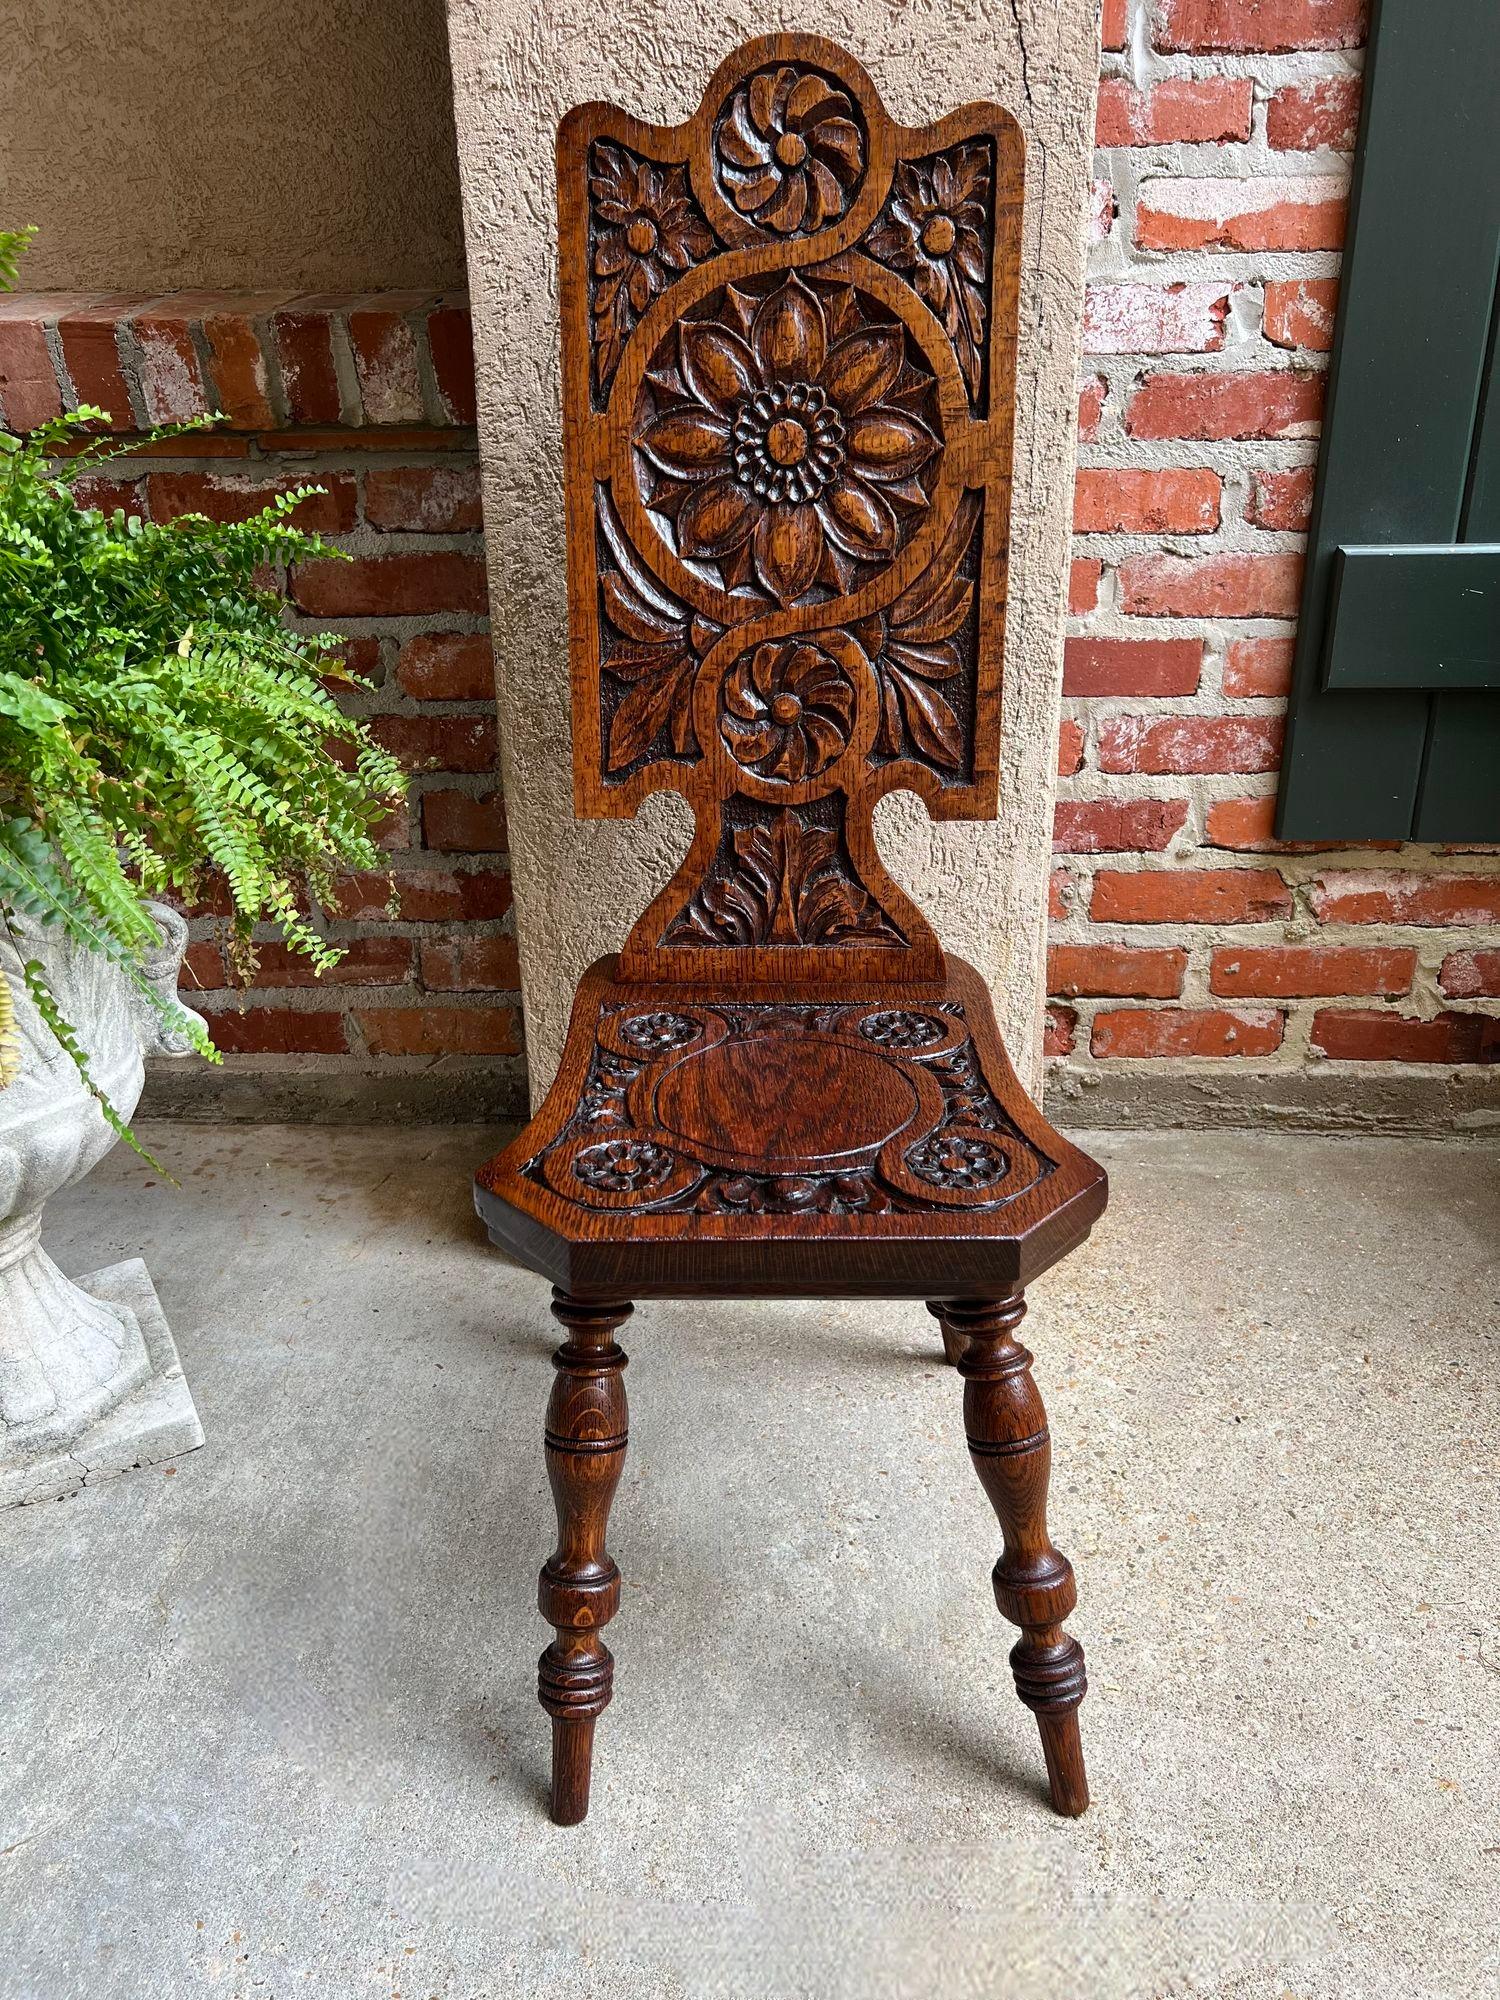 Antique English Spinning Wheel Chair Carved Oak Hall Fireplace Hearth Chair.

Direct from England, a beautiful antique English “spinning wheel” chair with elaborate hand carvings on the seat and back.
The slender, tall back includes a dome top with